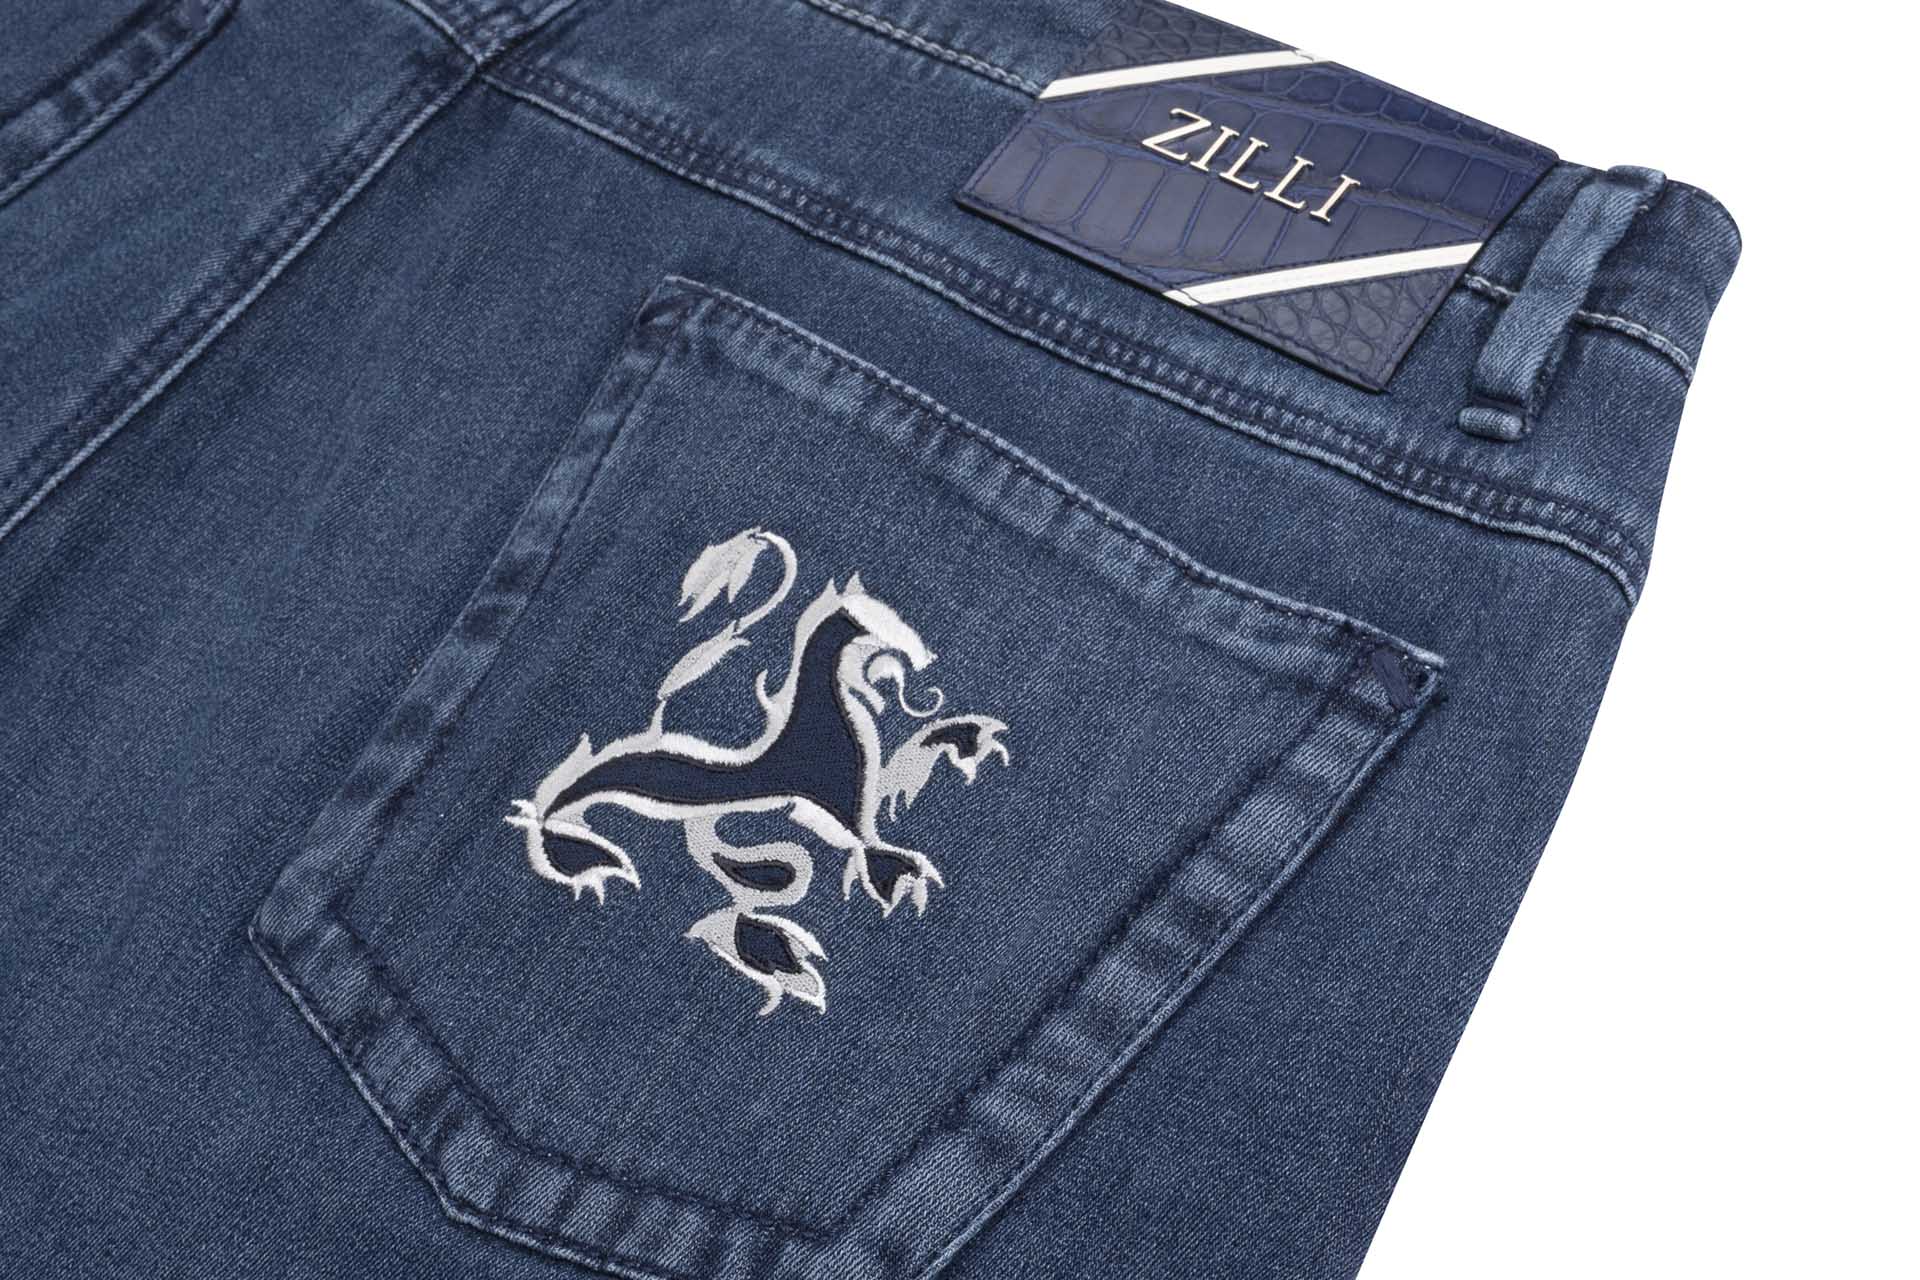 Slim Fit Jeans Griffon Embroidery with Alligator Details - ZILLI